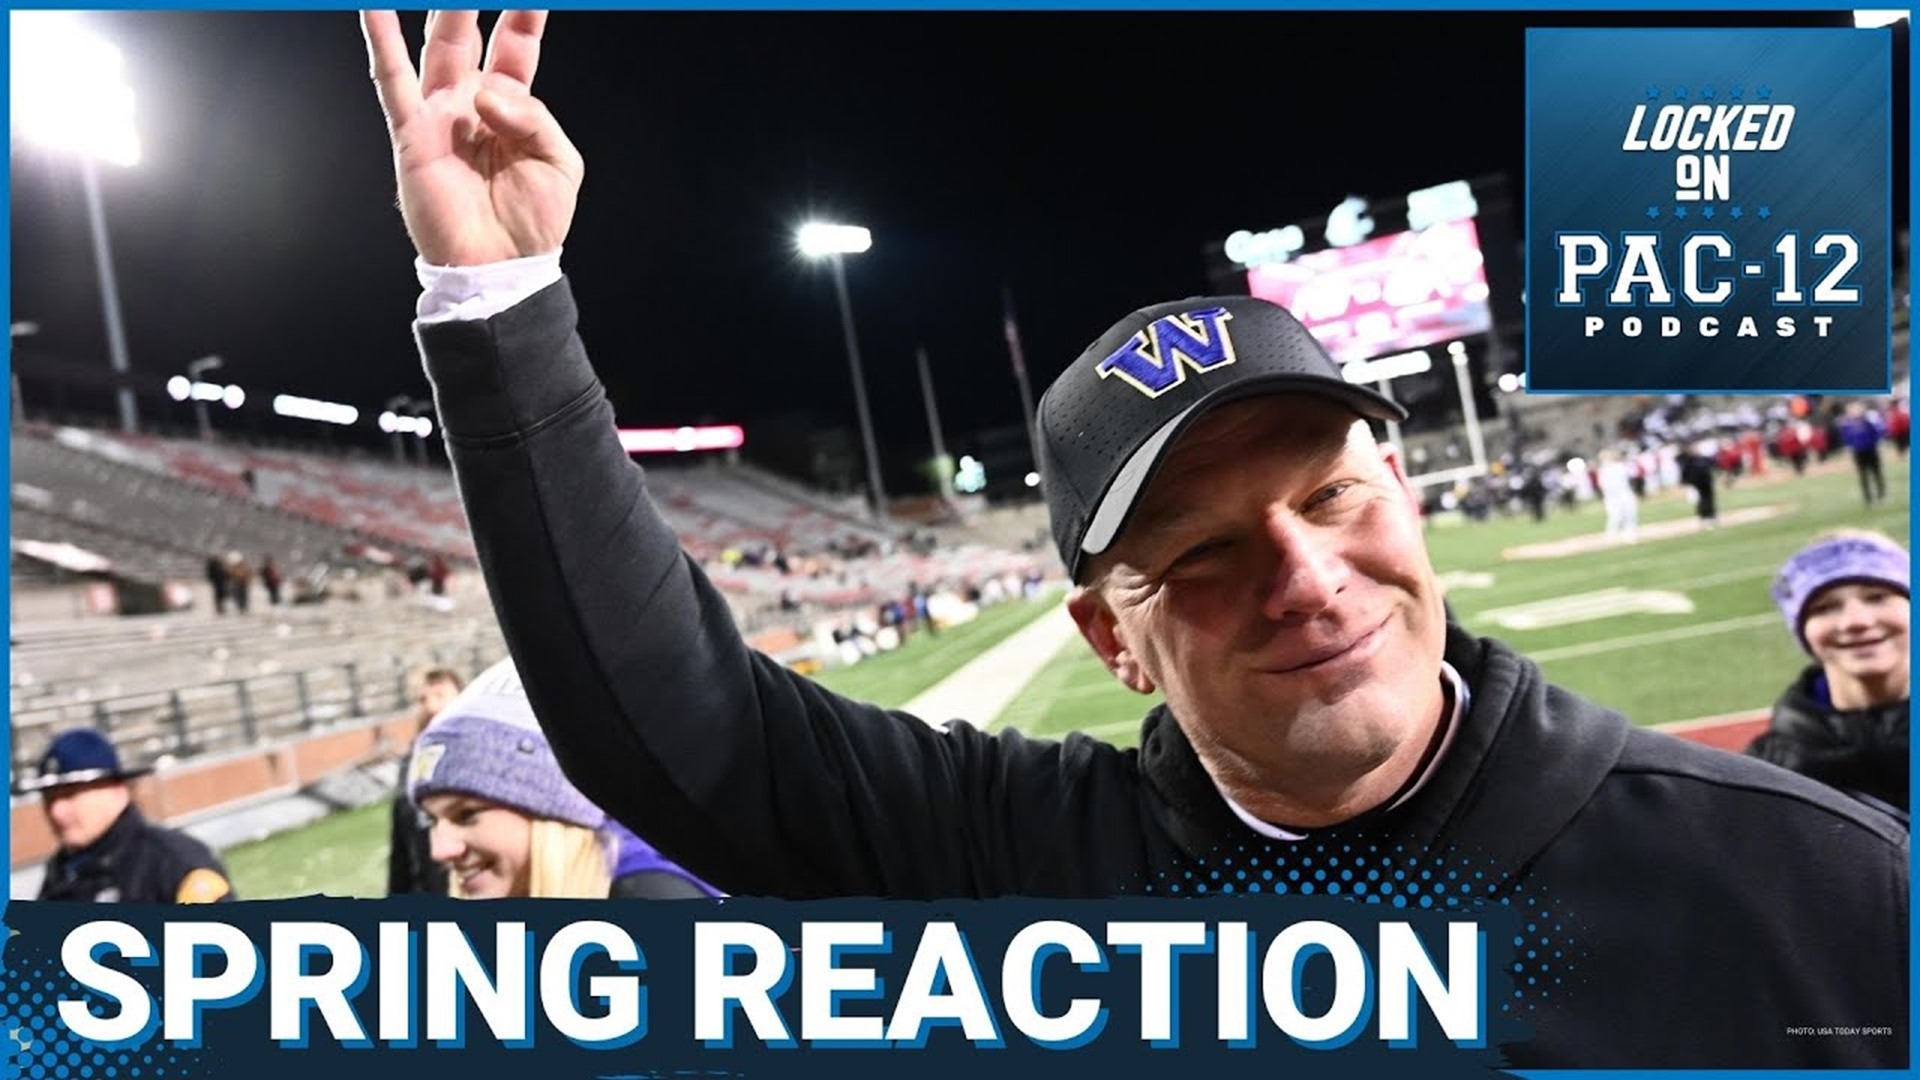 The Huskies enter year 2 under Kalen DeBoer after a wildly successful 2022 season returning several key impact players, including QB Michael Penix.